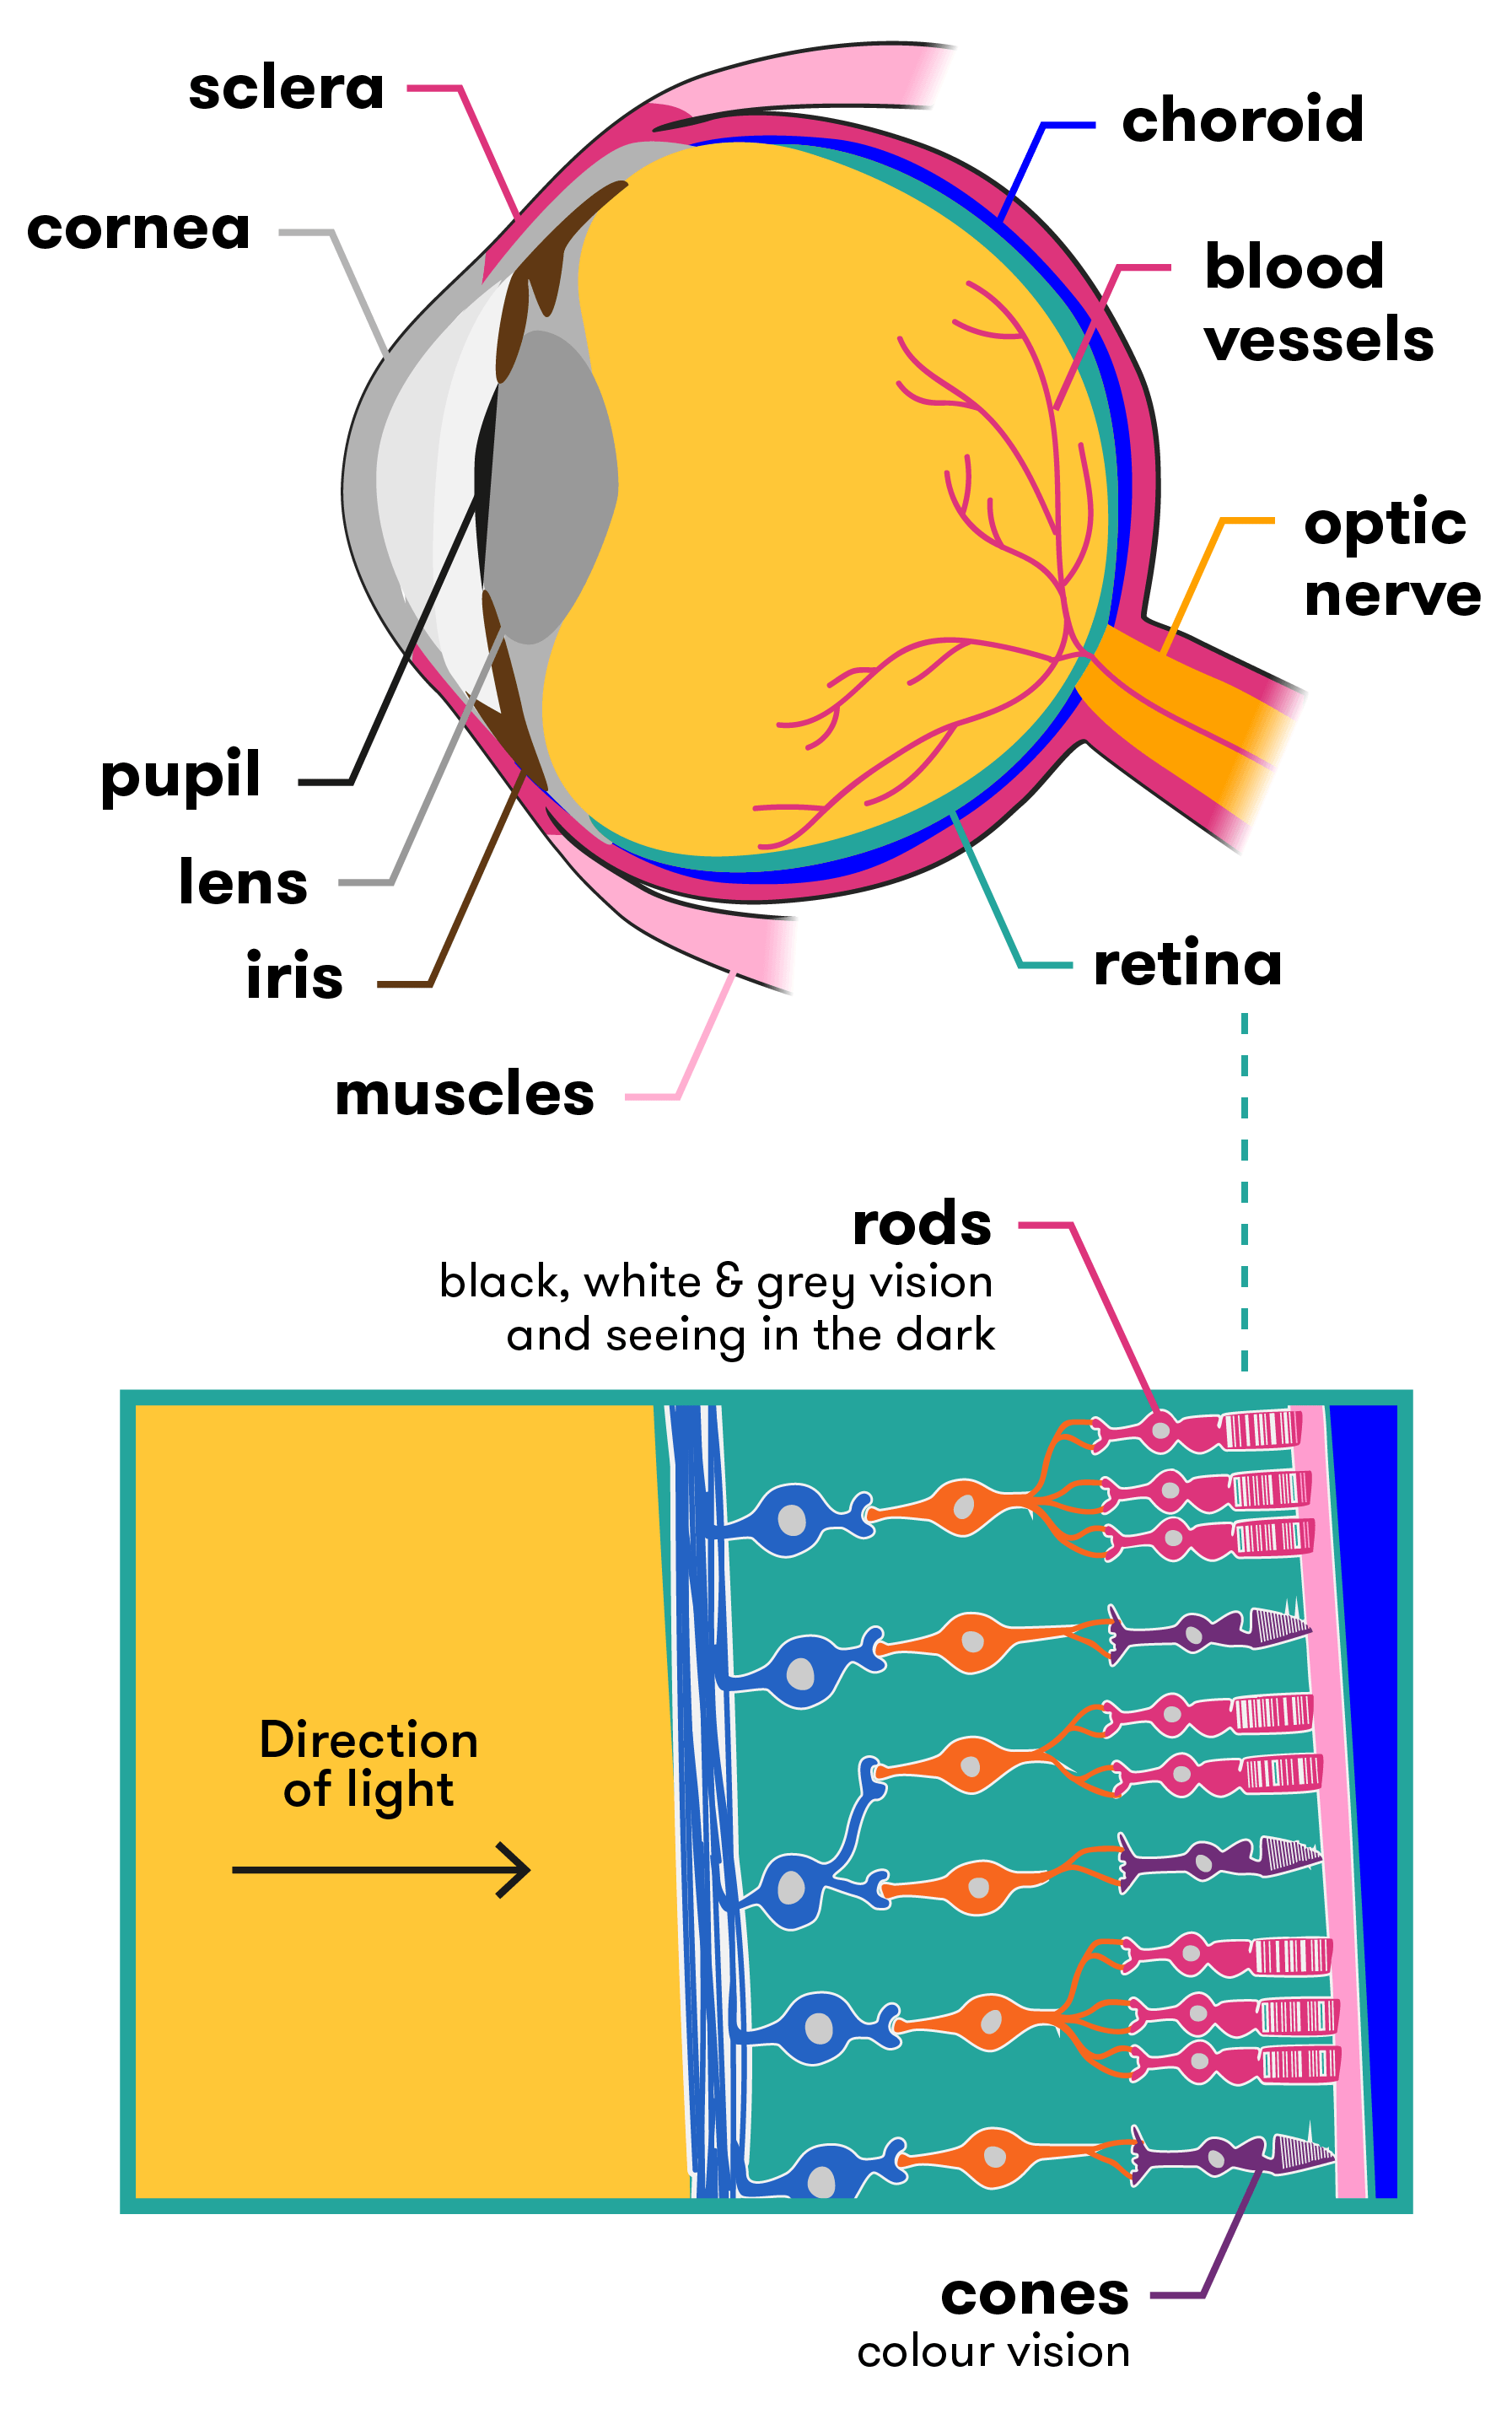 Anatomy of the eye and retina, as described above and below